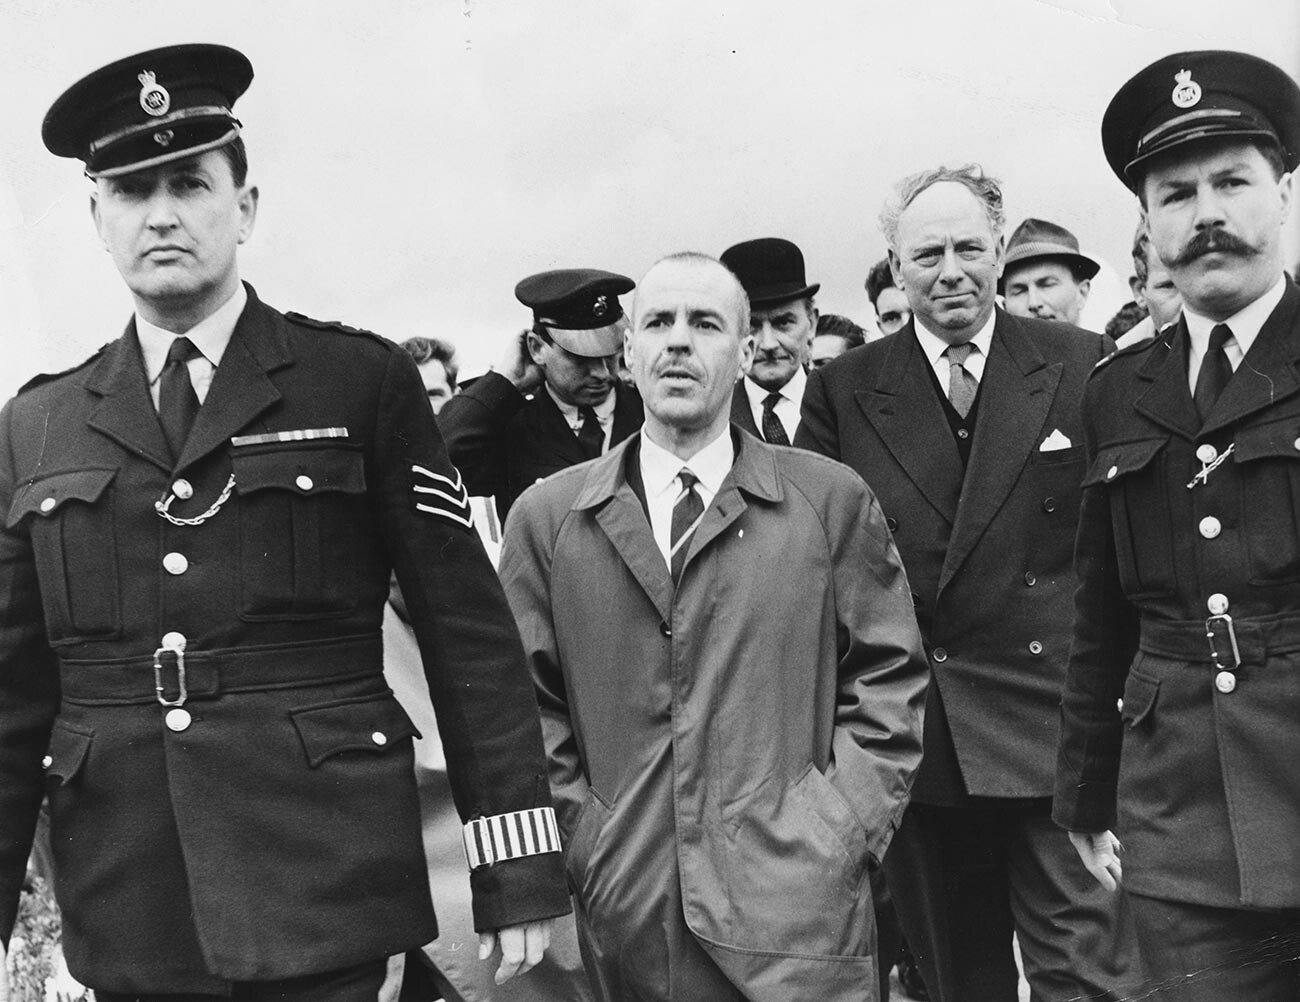 Greville Wynne being escorted by policeman after arriving back home from the Soviet Union, at Northolt Airport, England, April 22nd 1964.